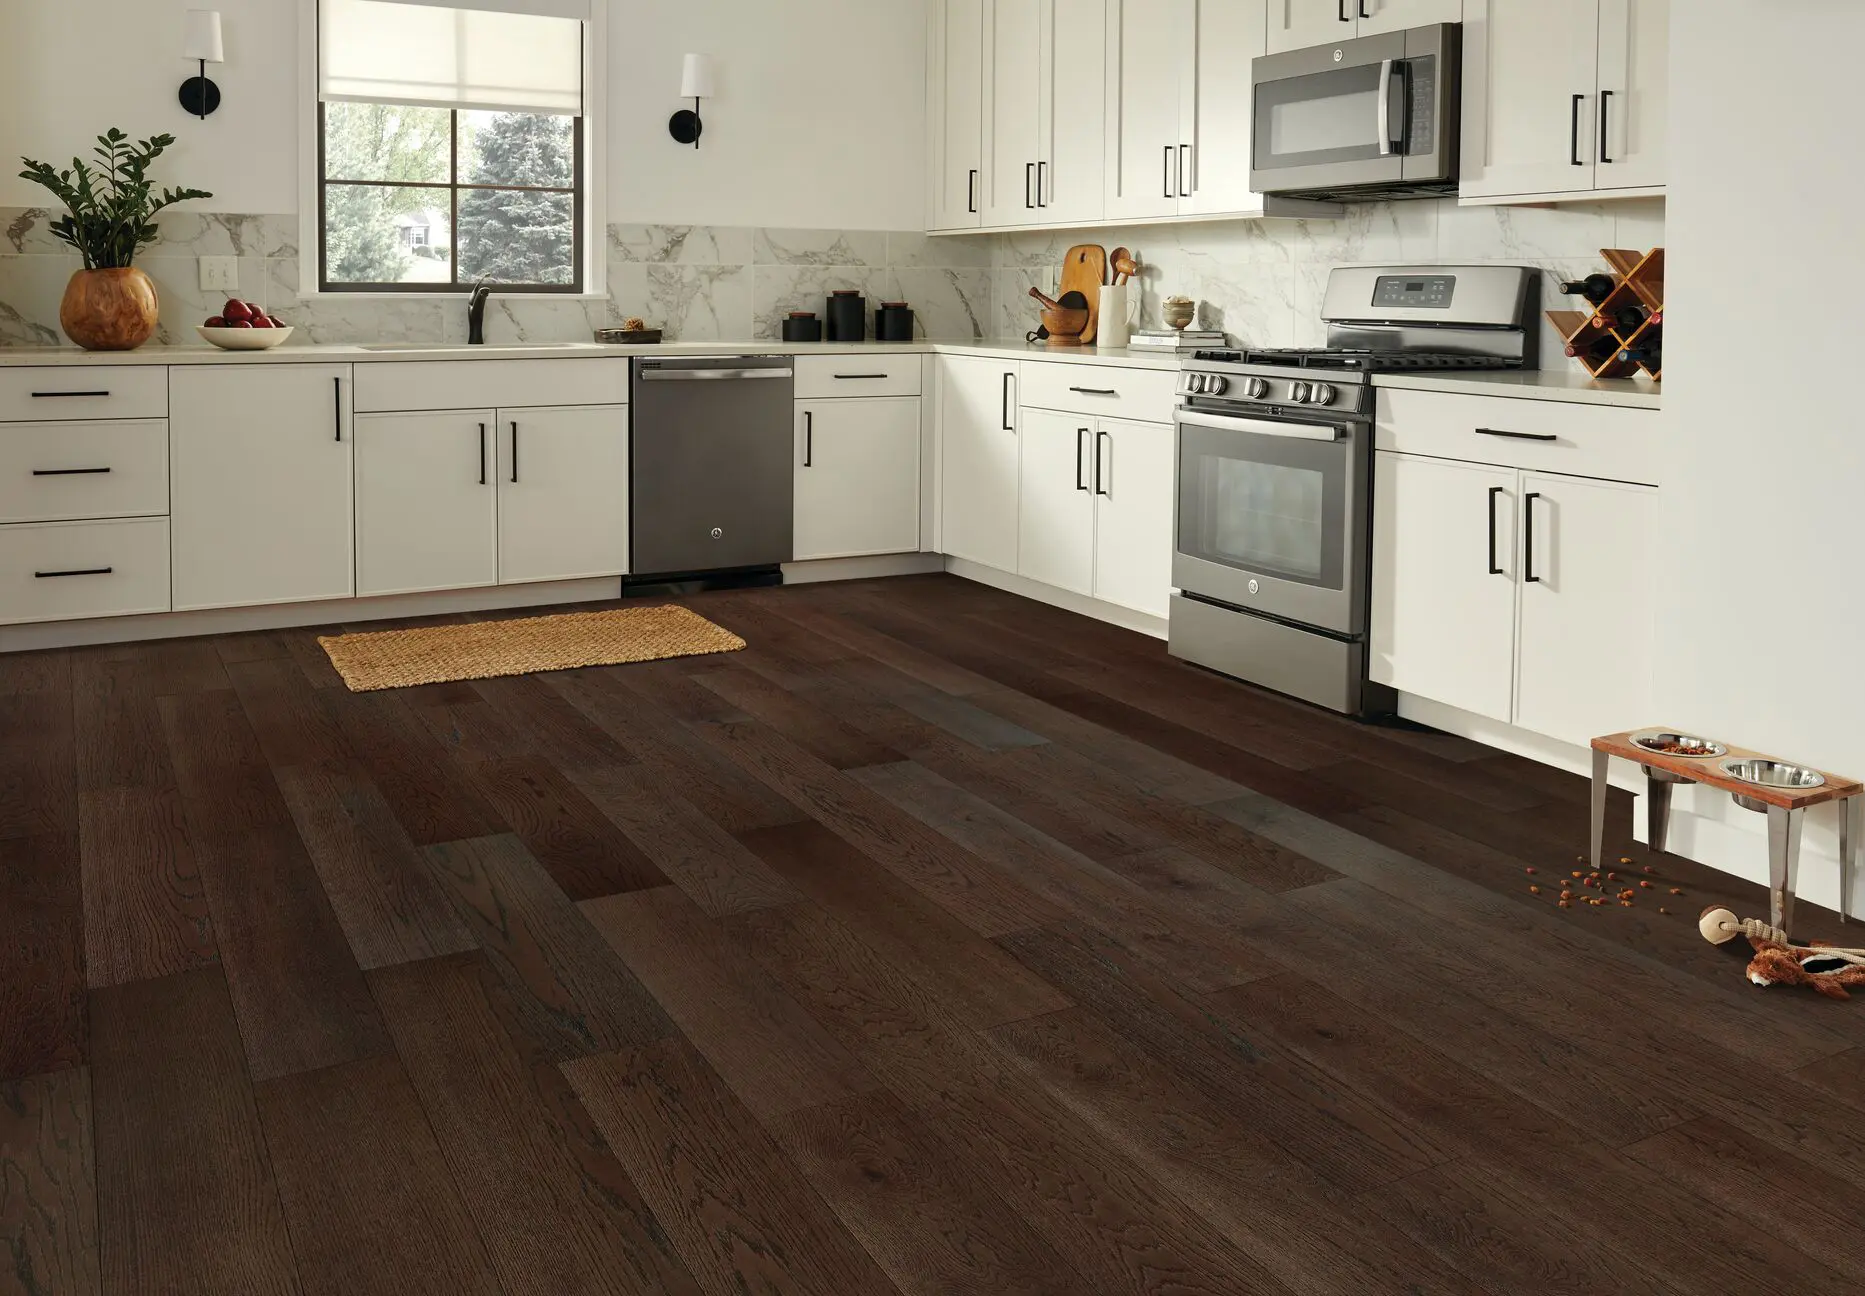 Picture of a Nice Living Space with Premium Flooring